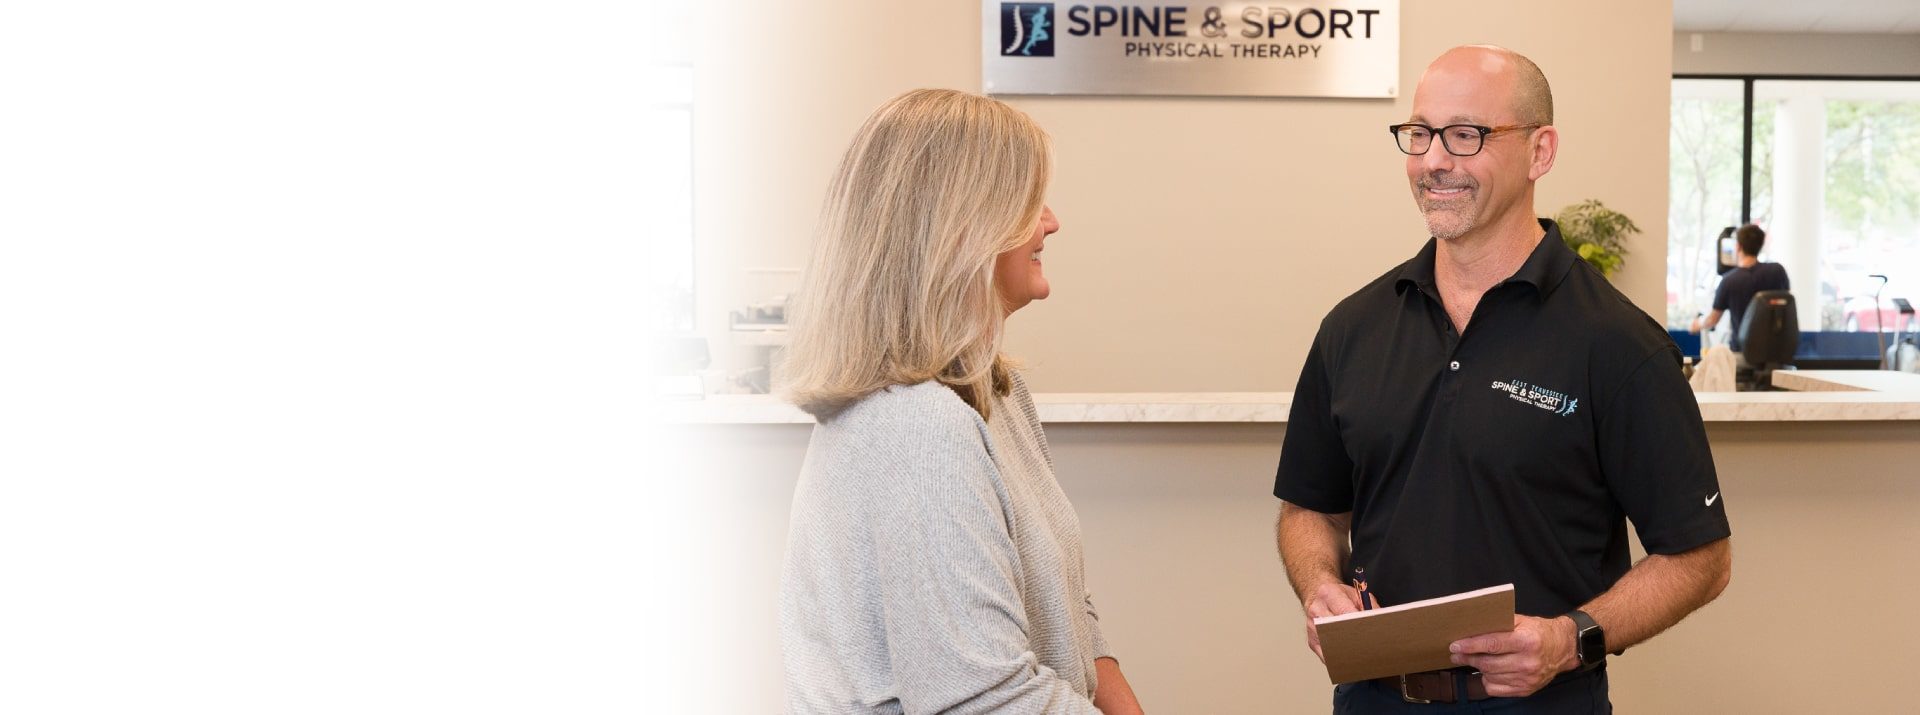 Knoxville's Top Physical Therapy Clinic